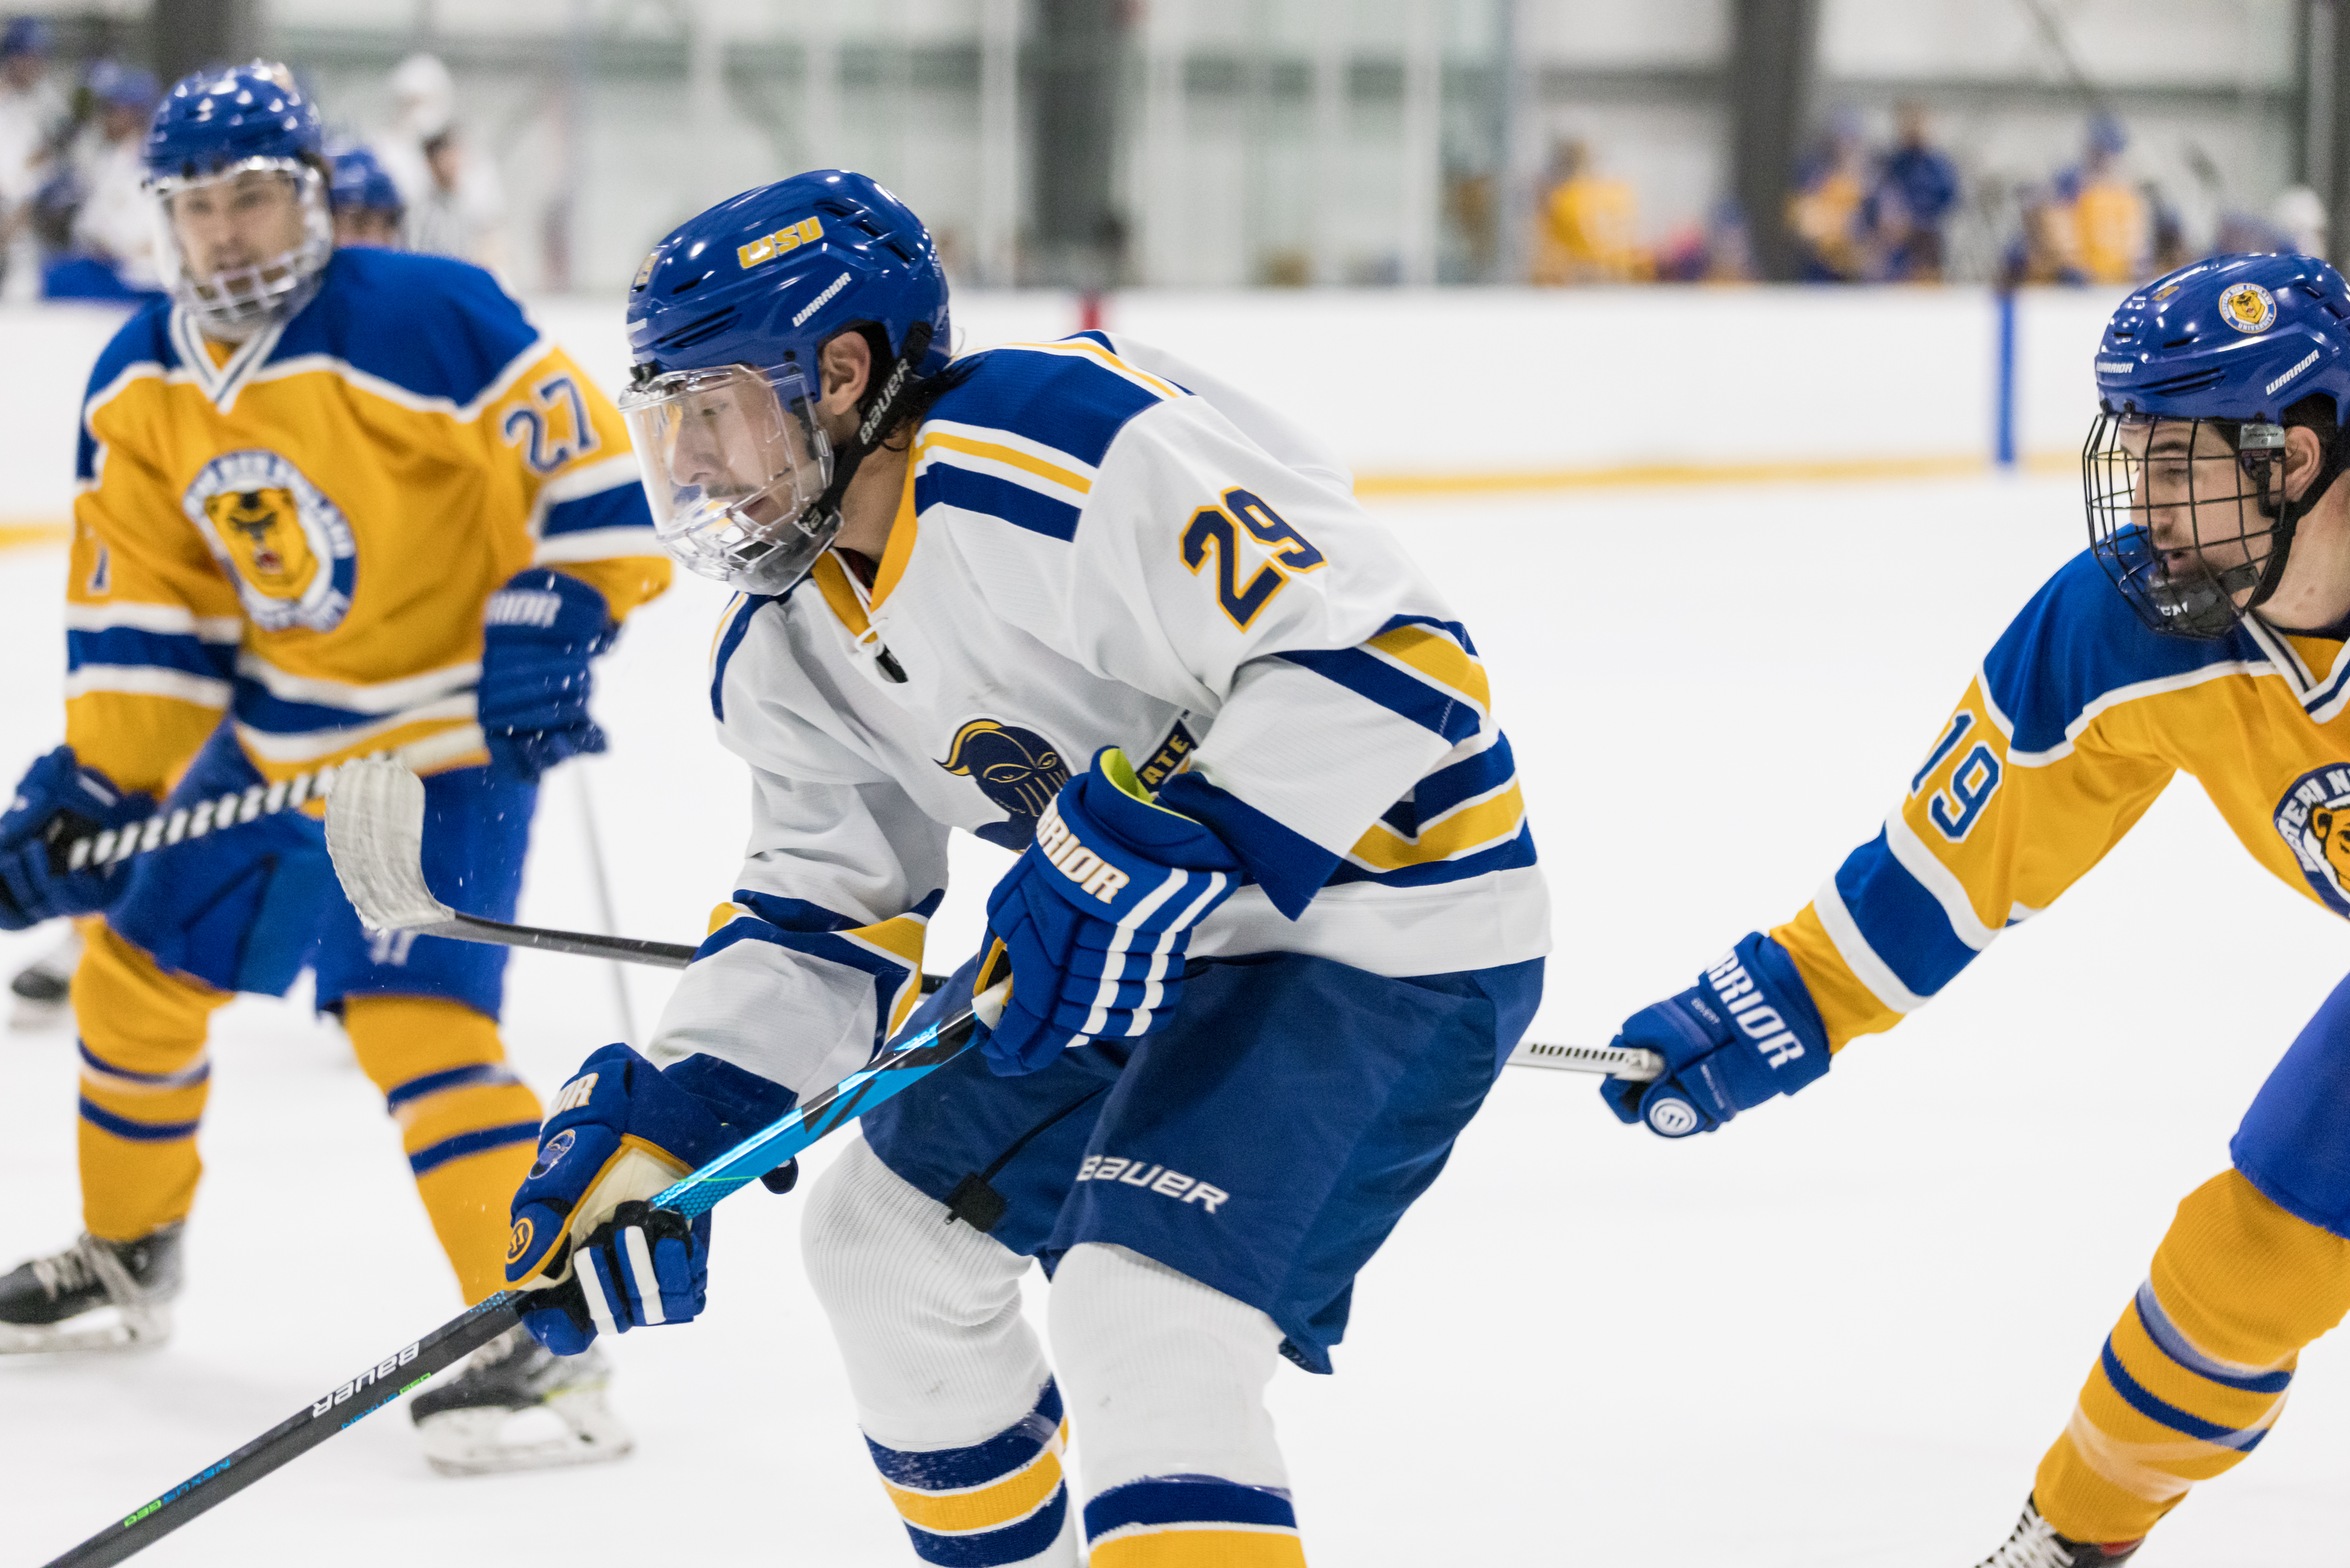 Men's Ice Hockey Grabs Second Win over Westfield State and Second Shutout Victory of the Season